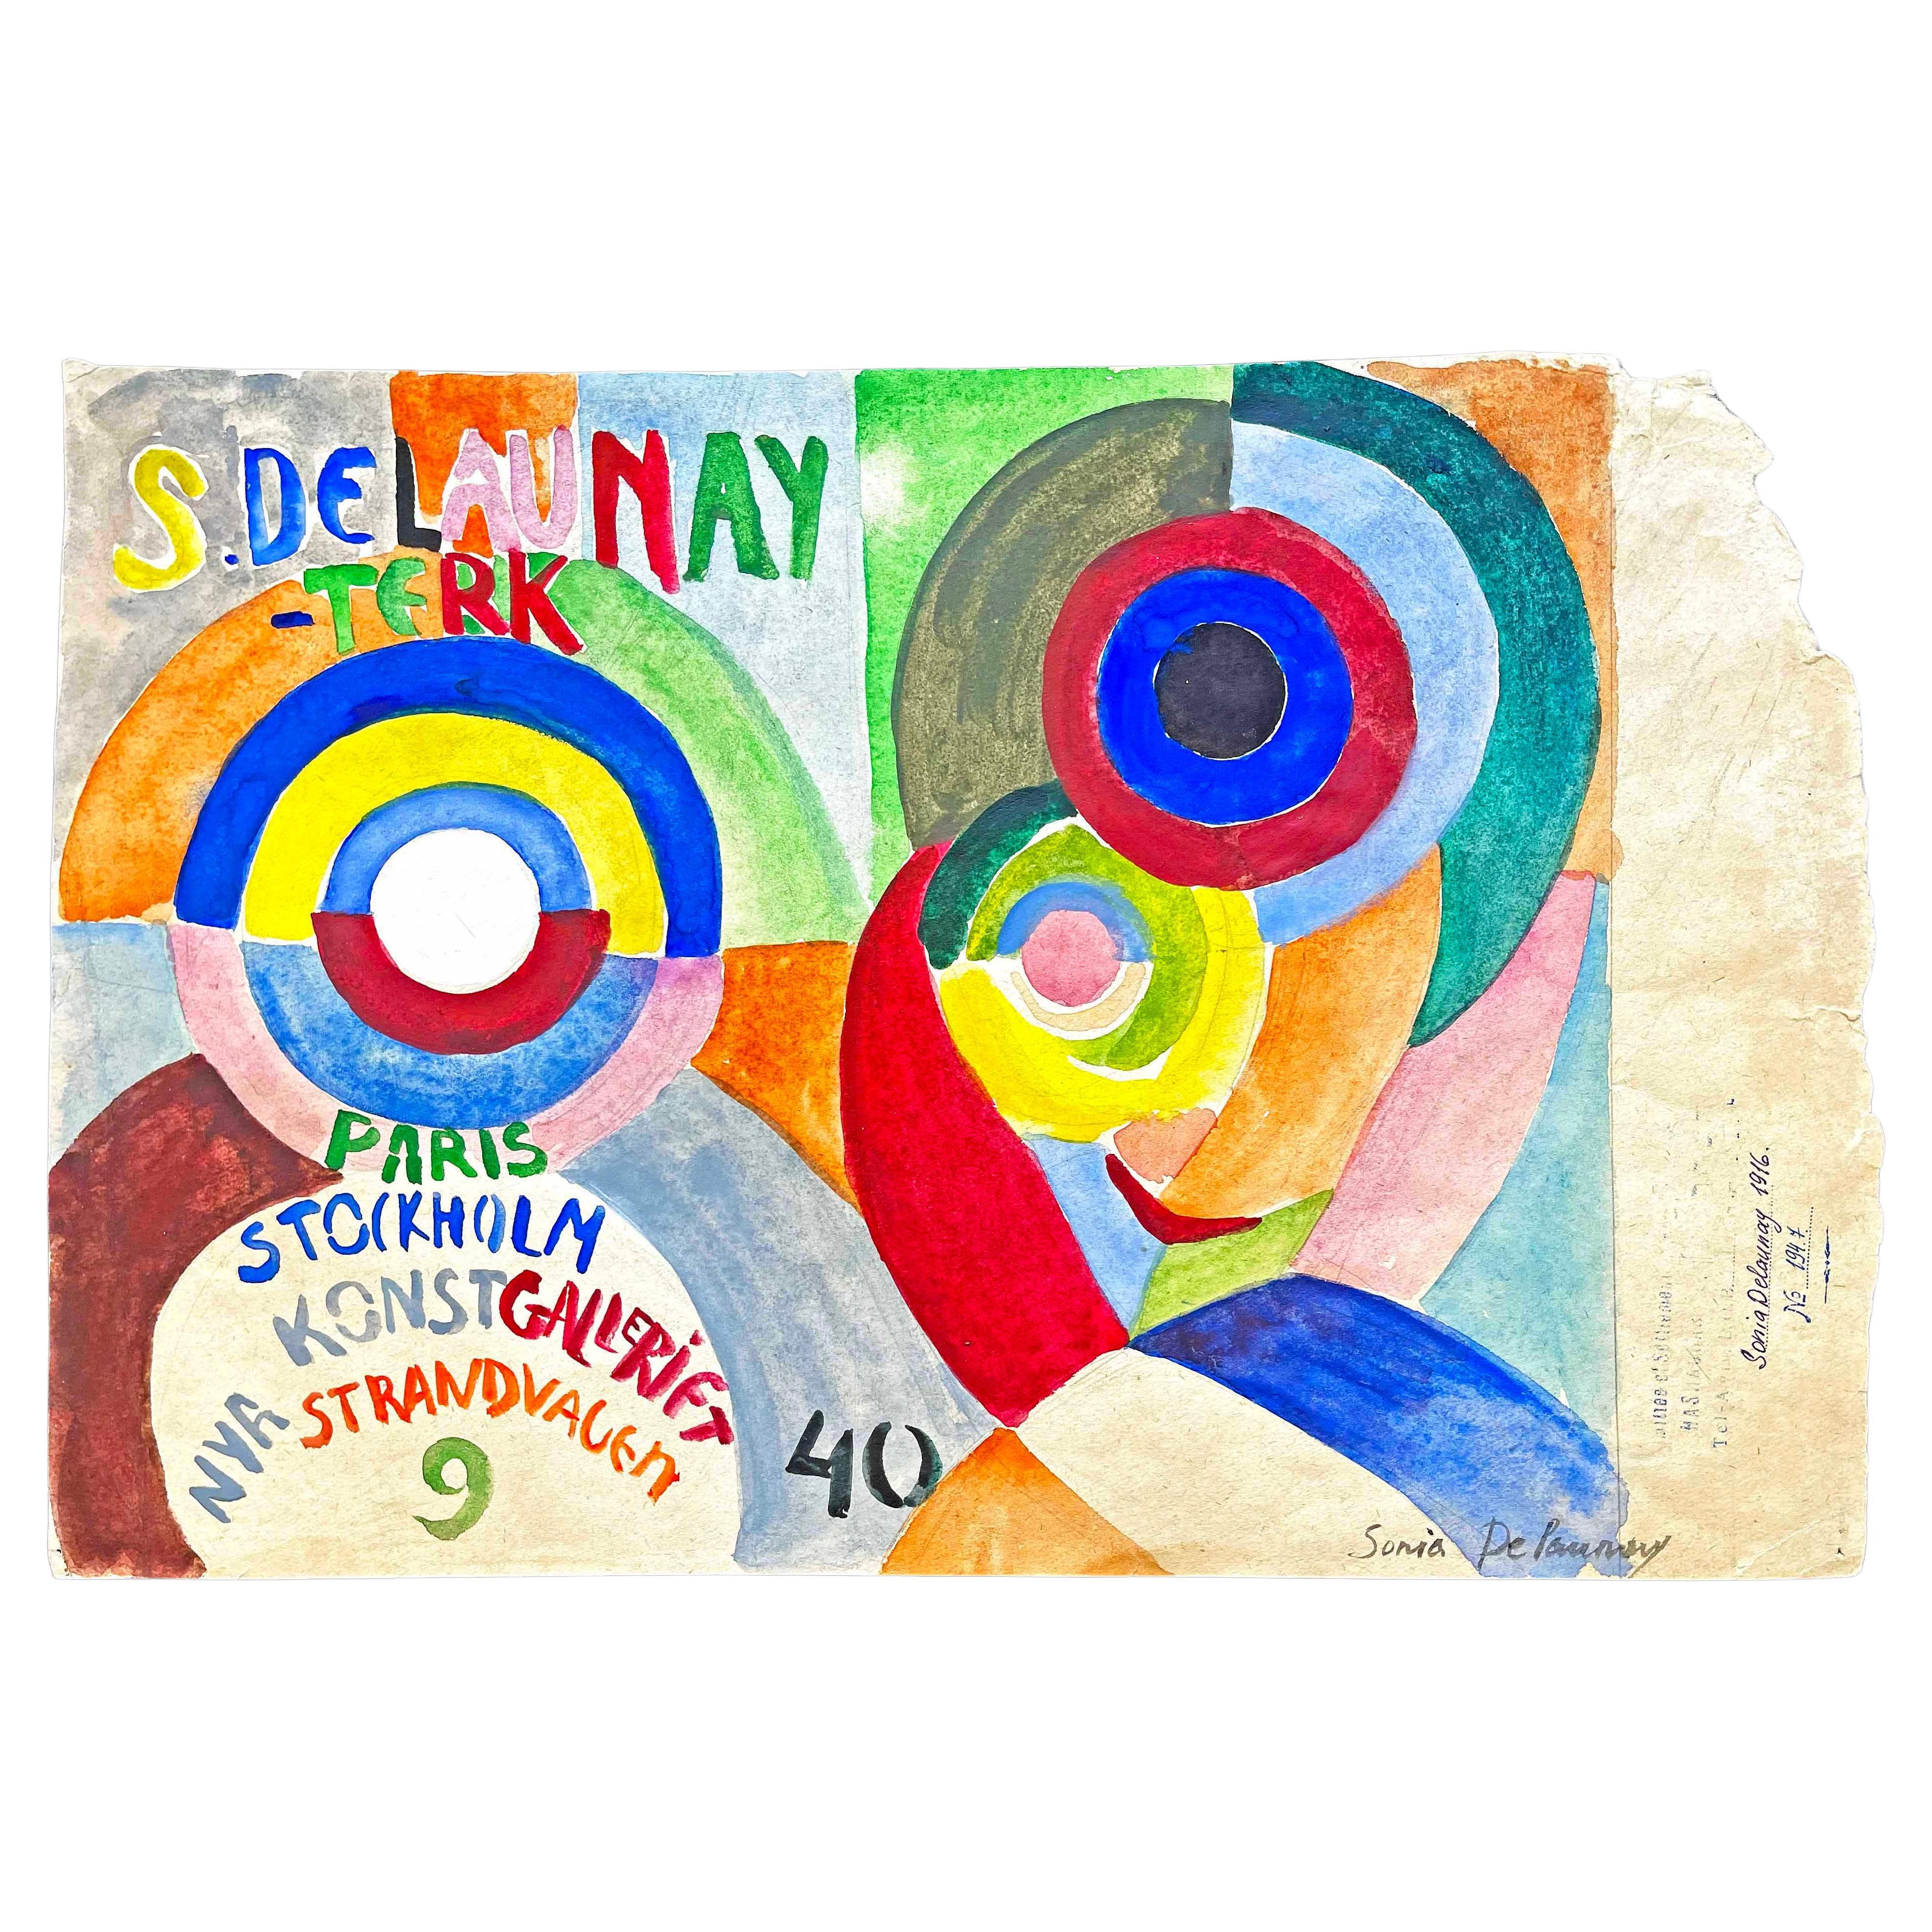 1916 Exhibition Catalogue Study by Sonia Delaunay for Stockholm Gallery